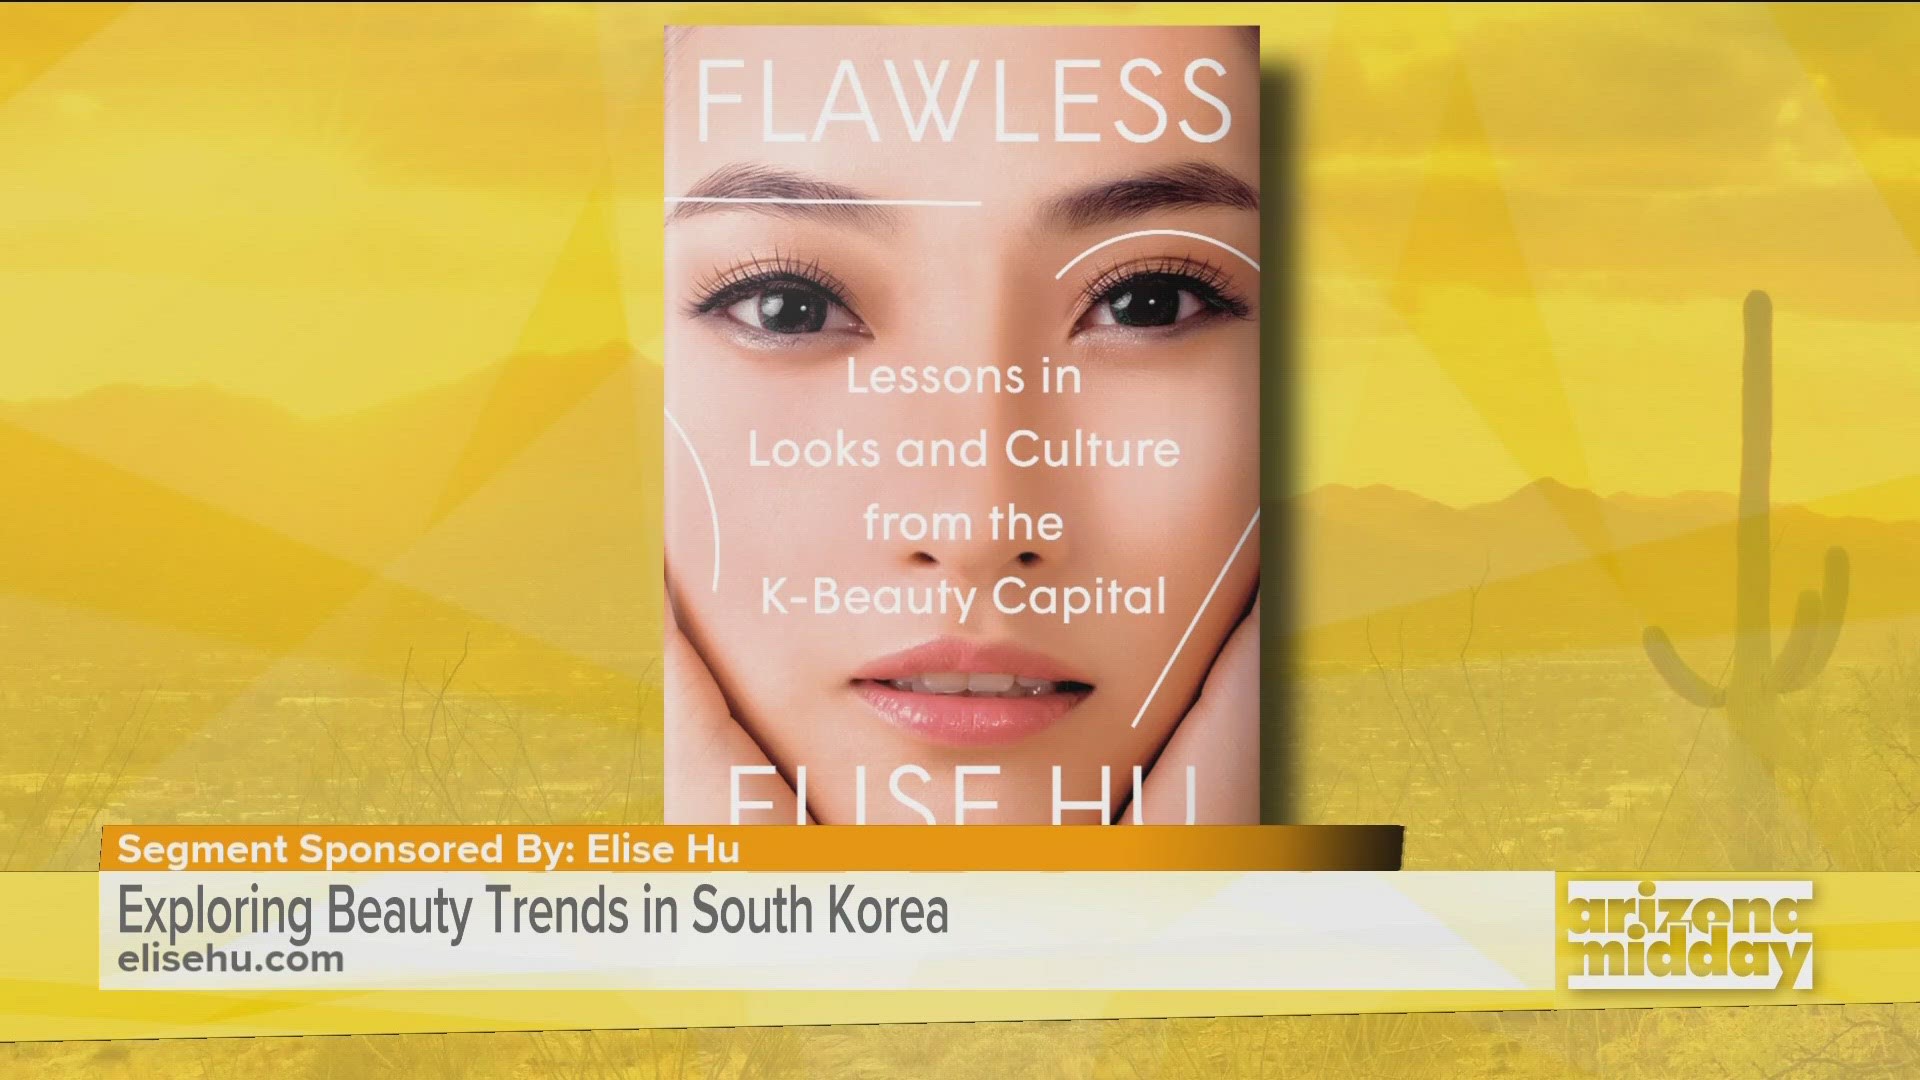 Destry sits down with author Elise Hu to discuss beauty pillars and her new book Flawless.